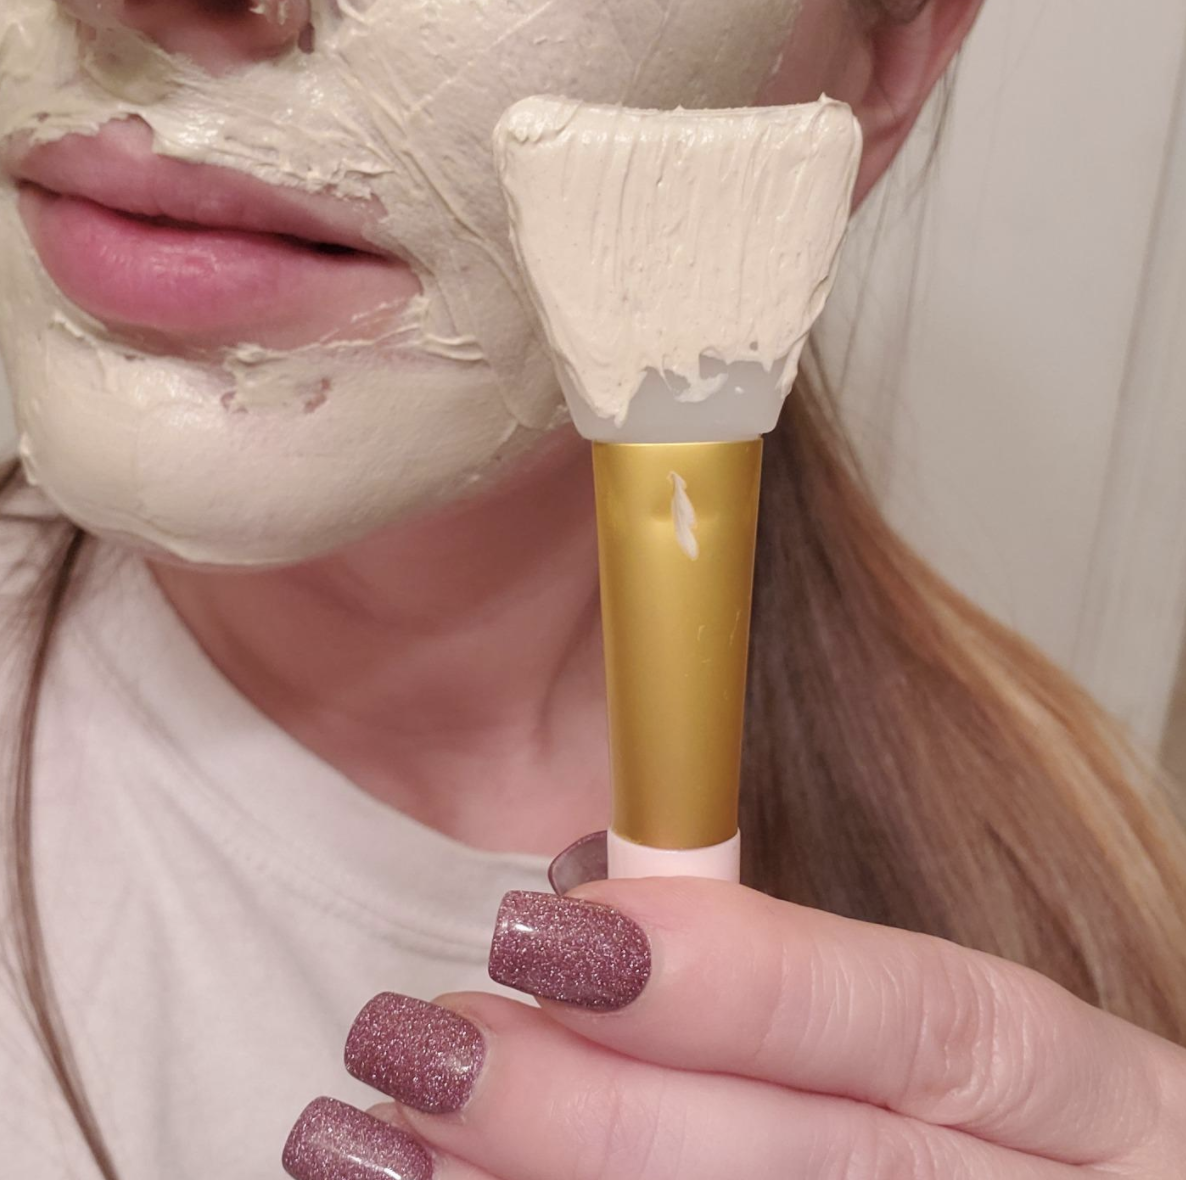 Person applies mask with silicone applicator